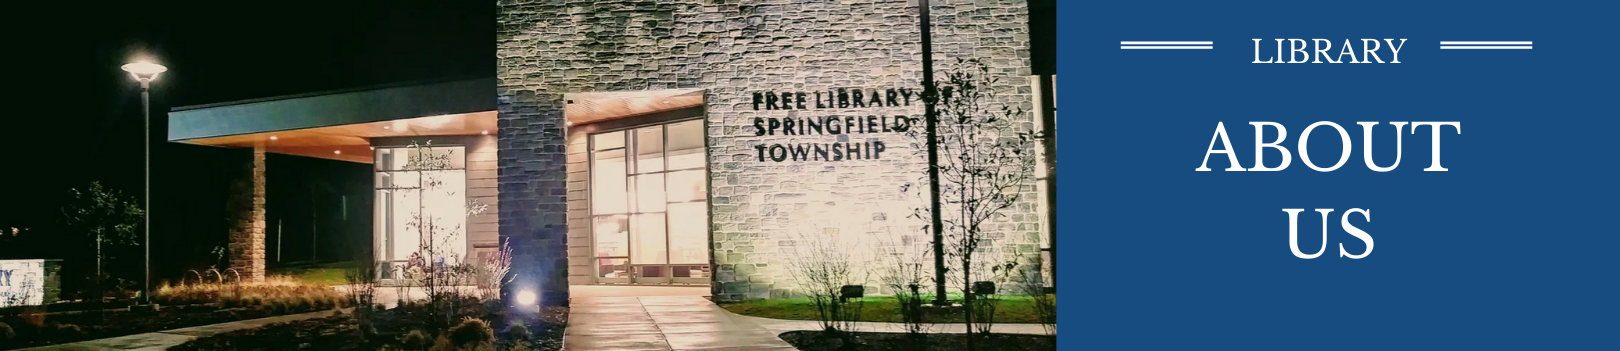 springfield township montgomery county school district jobs